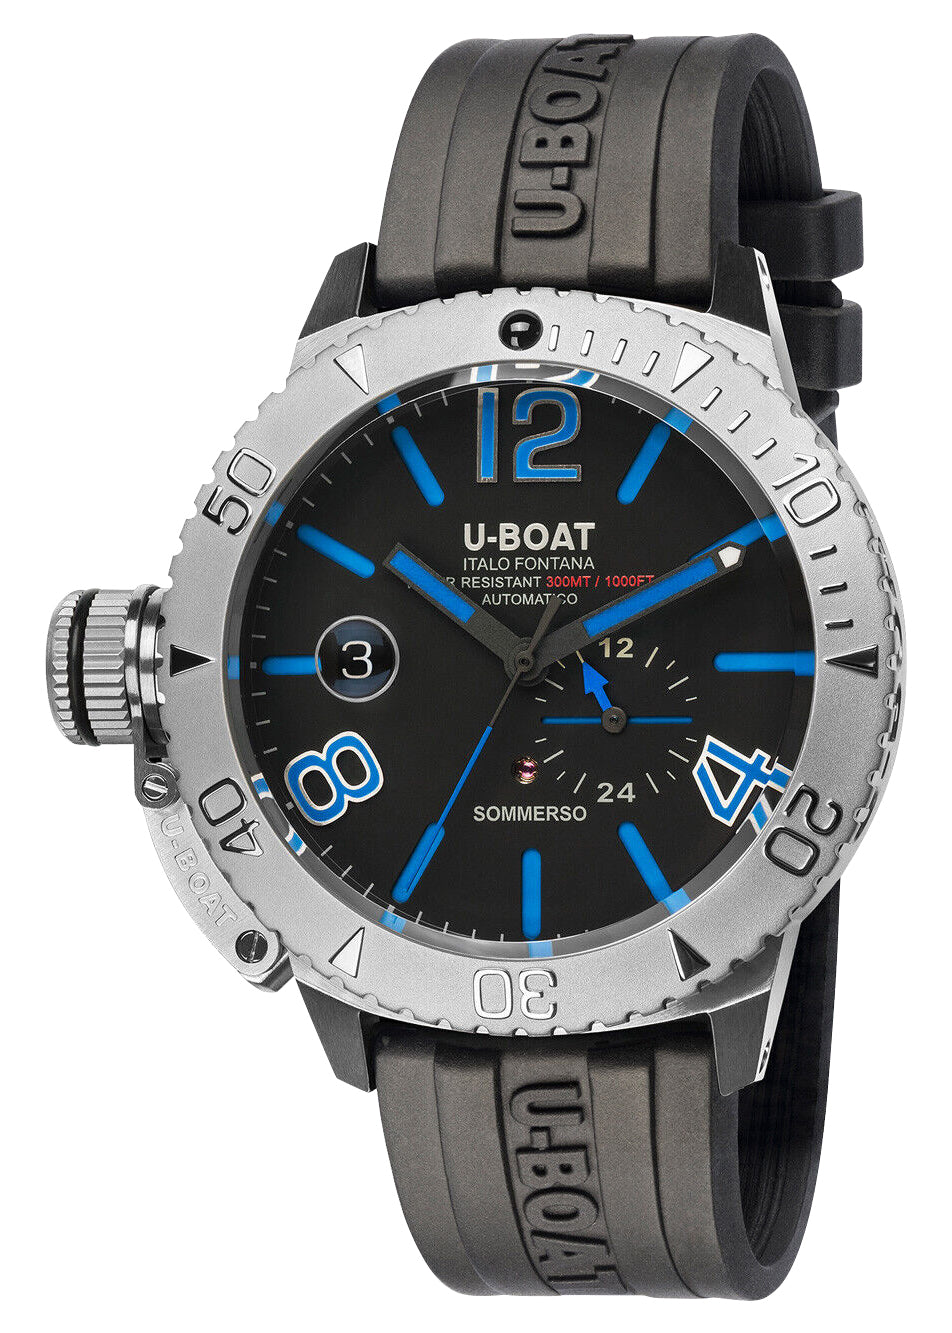 update alt-text with template Watches - Mens-U-Boat-9014-24-hour display, 45 - 50 mm, black, date, day/night indicator, divers, mens, menswatches, new arrivals, round, rpSKU_8486, rpSKU_9007, rpSKU_9015/MT, rpSKU_9306, rpSKU_9520/MT, rubber, Sommerso, stainless steel case, swiss automatic, U-Boat, uni-directional rotating bezel, watches-Watches & Beyond